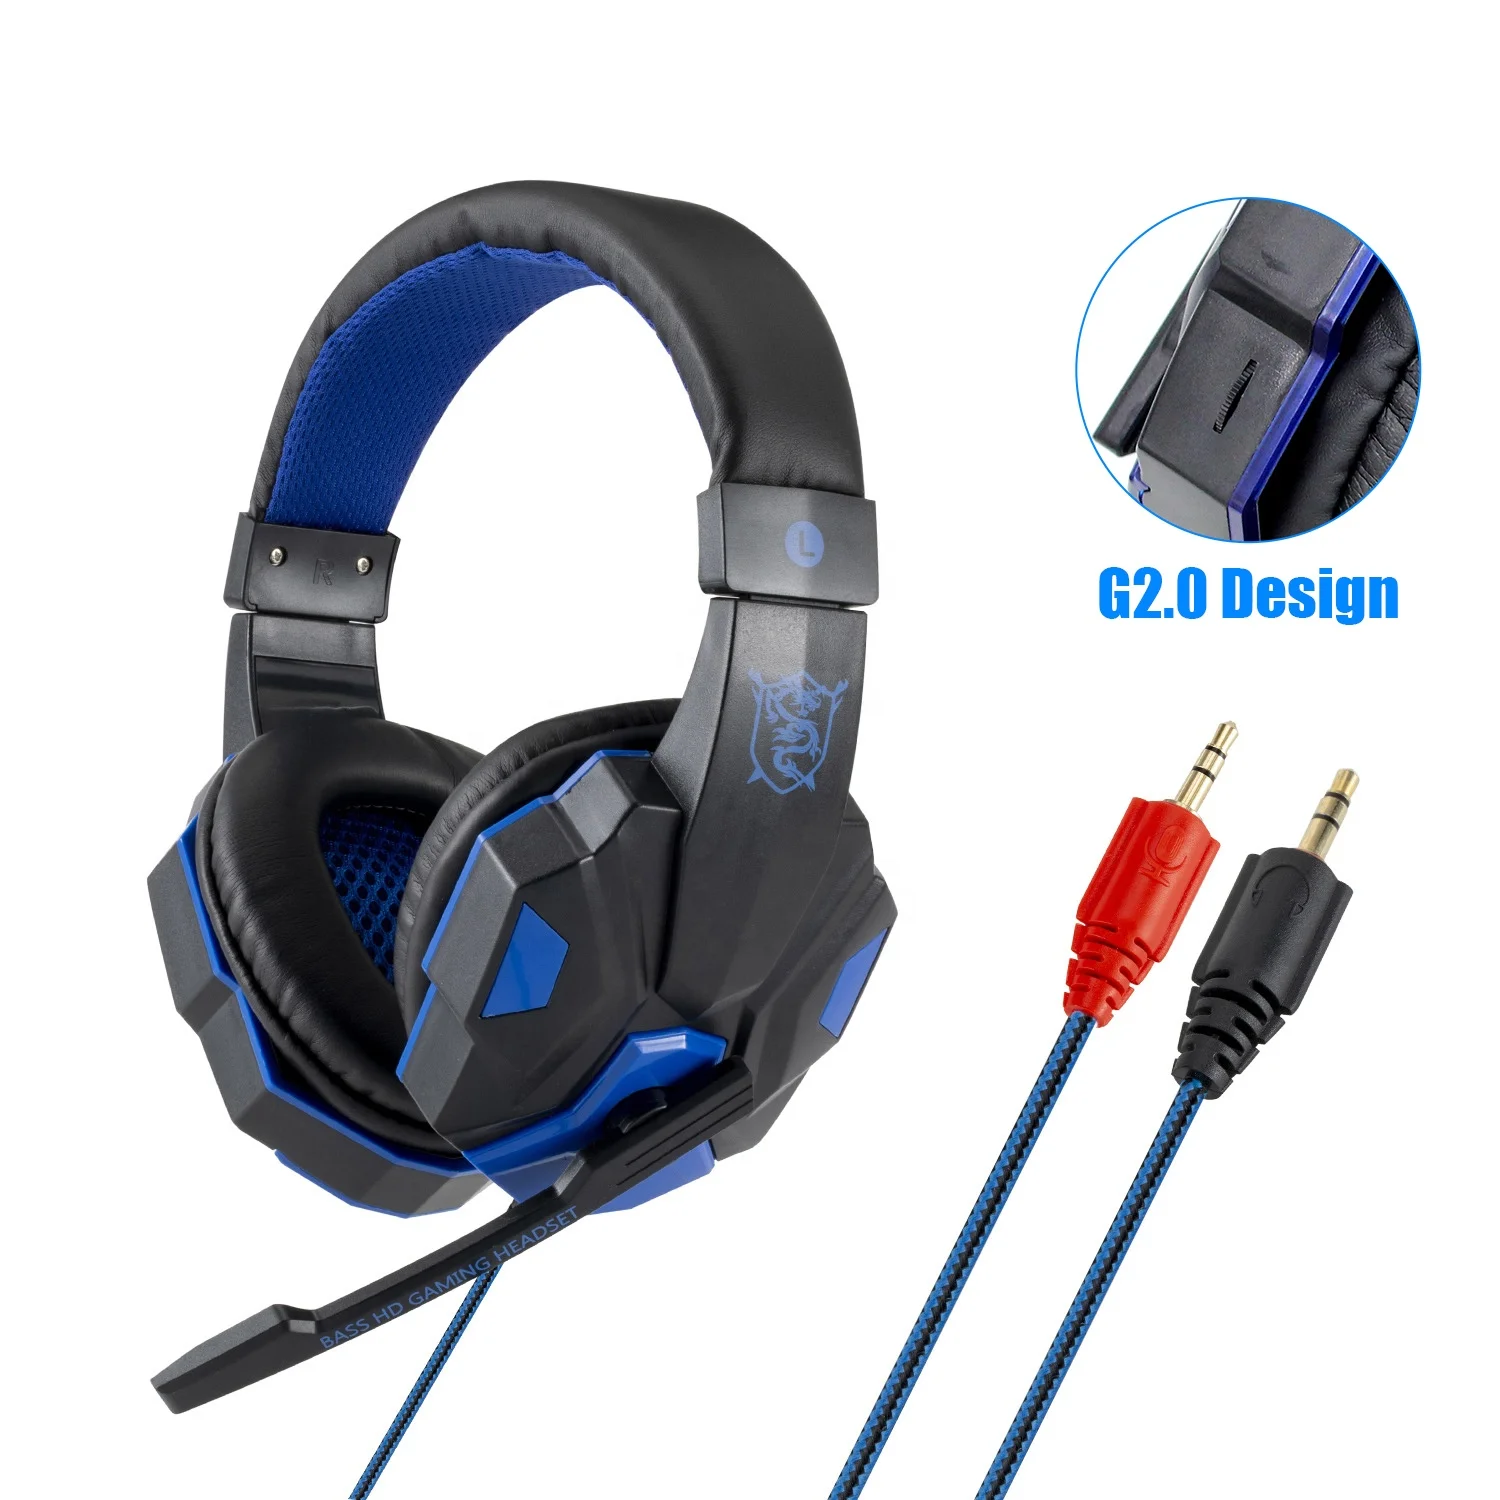 Headband Style Wired Led Light Up Gamer Headphones With Microphone  Headphones For Gaming - Buy Headphones For Gaming,Headphones Gamer,Gaming  Headphones With Microphone Product on Alibaba.com